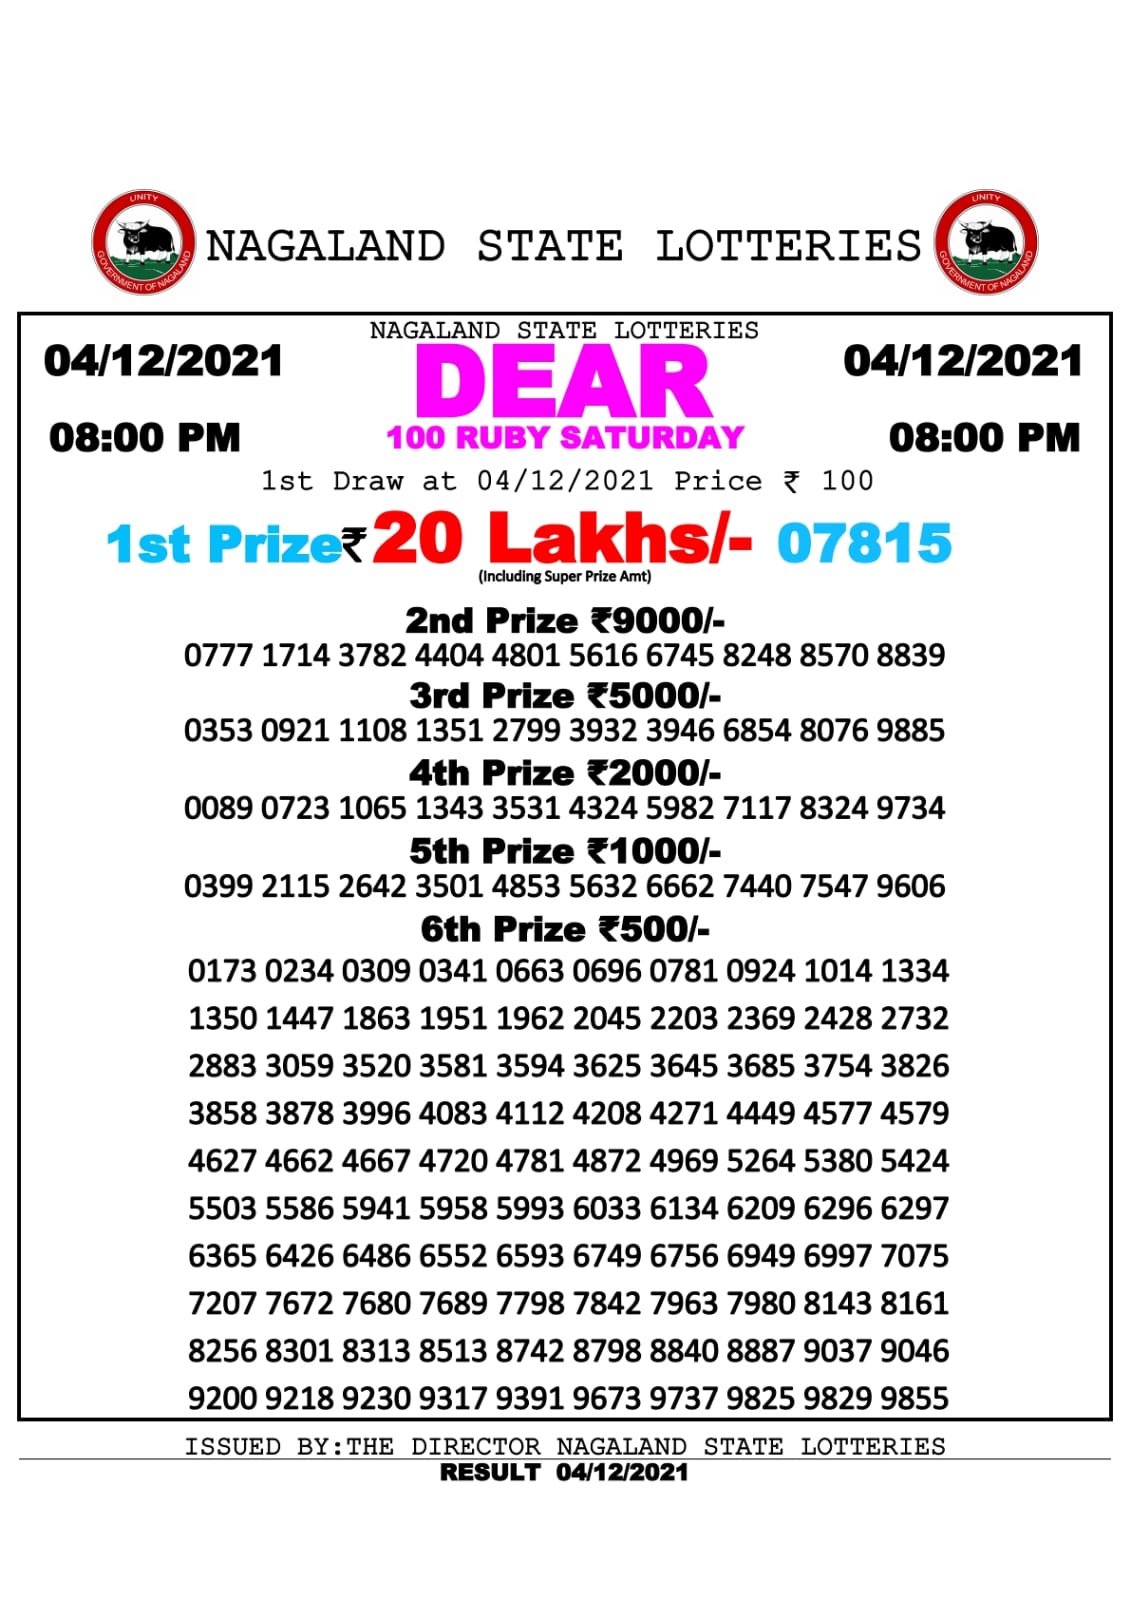 NAGALLAND STATE DEAR 100 SUPER WEEKLY LOTTERY 8 pm 04.12.2021